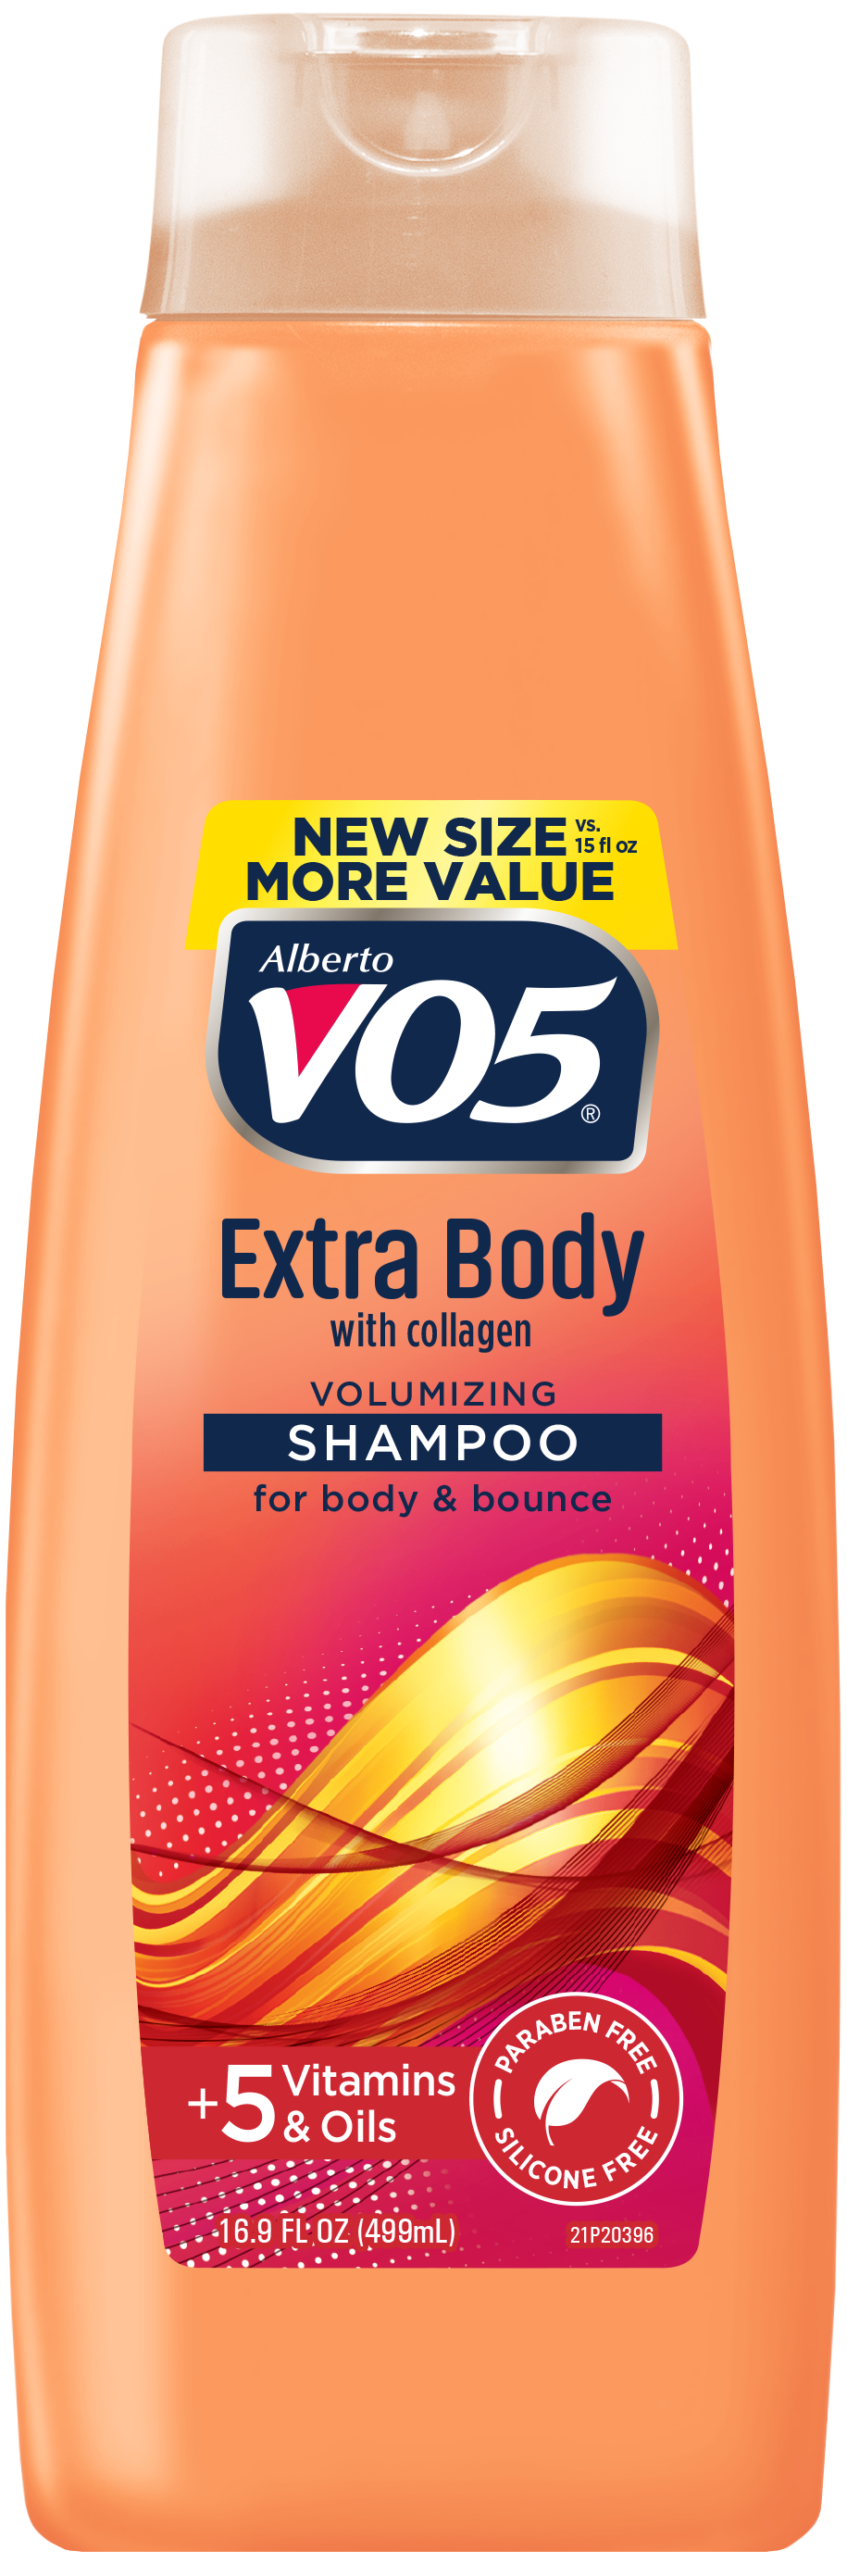 Alberto VO5 Extra Body Volumizing Shampoo with Collagen for All Hair Types, 16.9 oz - image 1 of 6